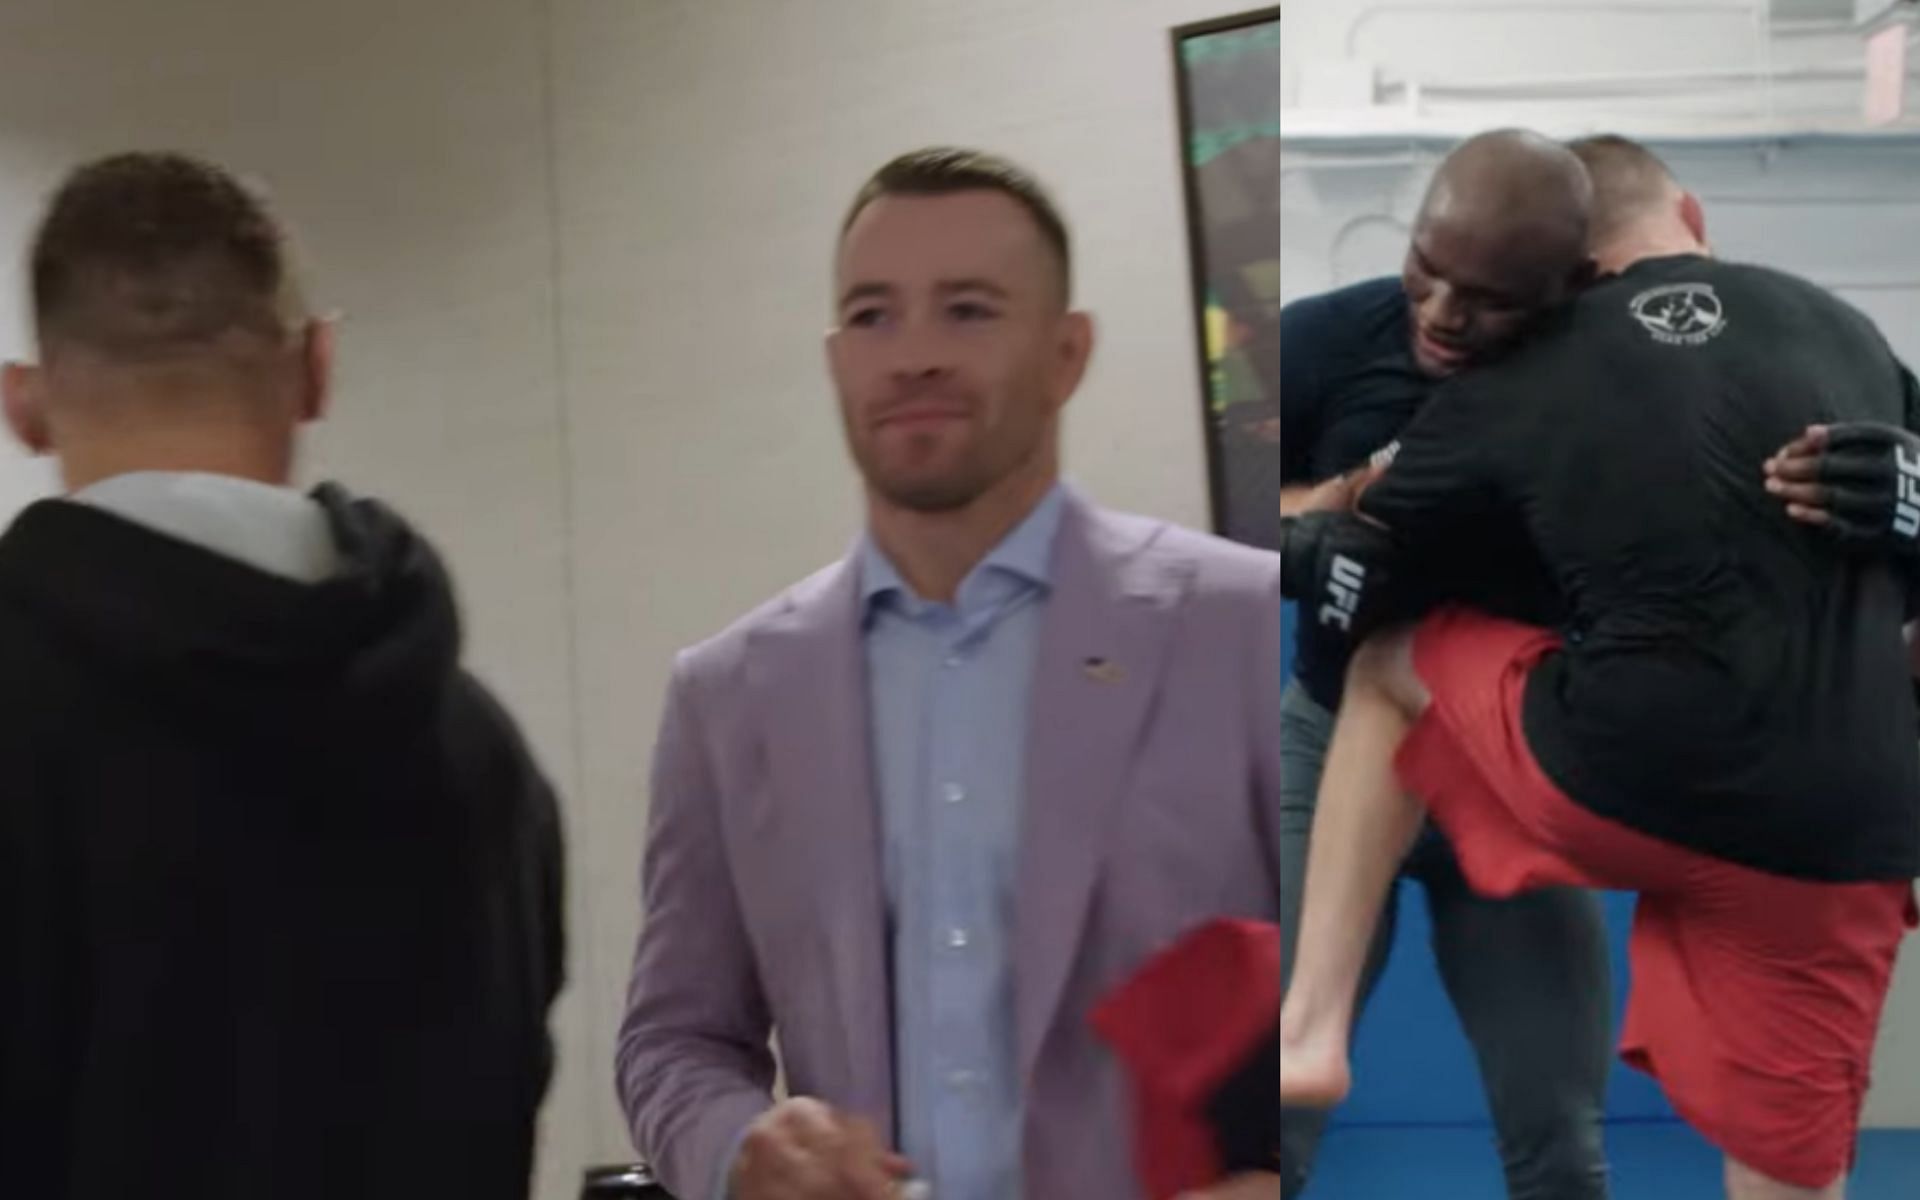 Michael Chandler passes Colby Covington in the corridor (left), while Kamaru Usman and Justin Gaethje take part in a light sparring session (right) [Images credit: screen grab from a UFC video on YouTube]